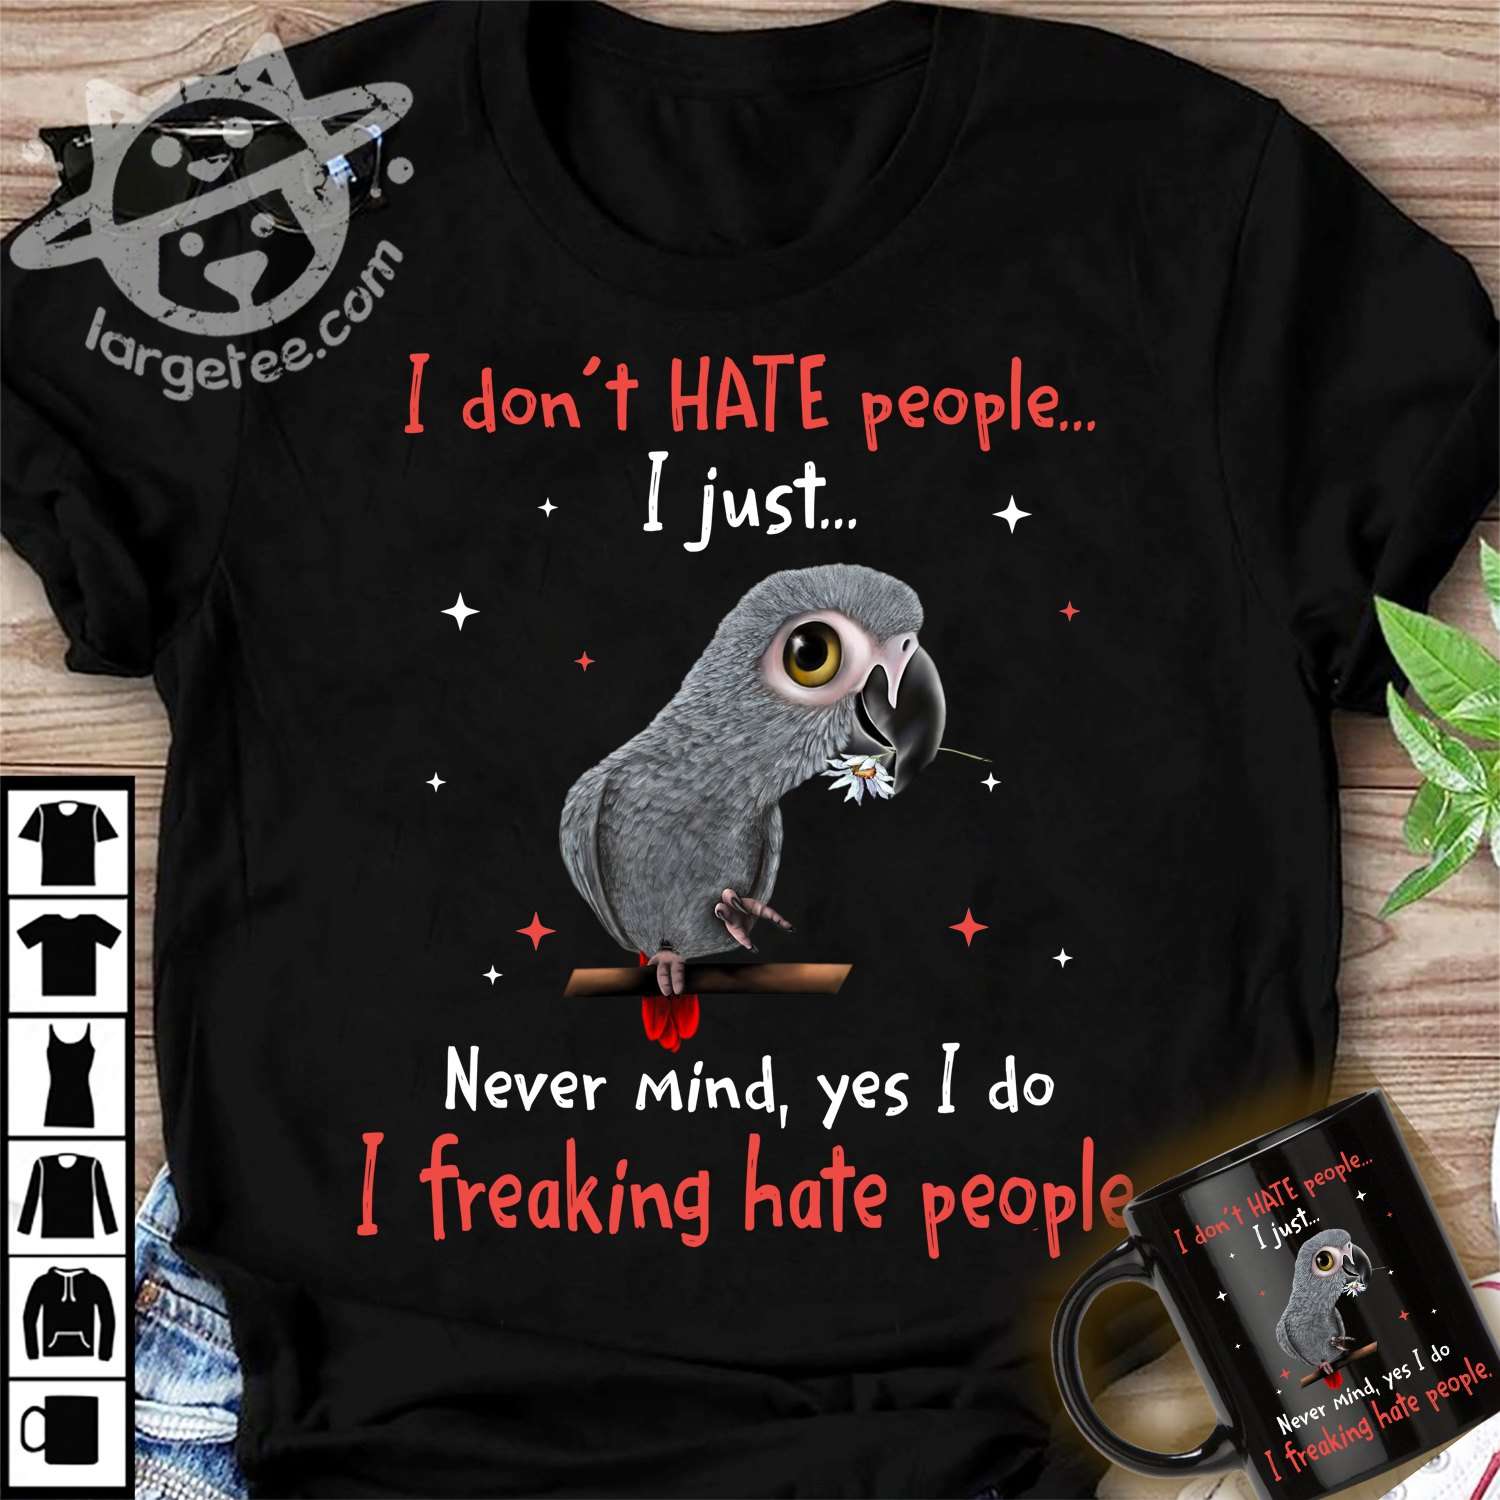 The Parrot Tees Gifts - I don't hate people i just never mind yes i do i freaking hate people